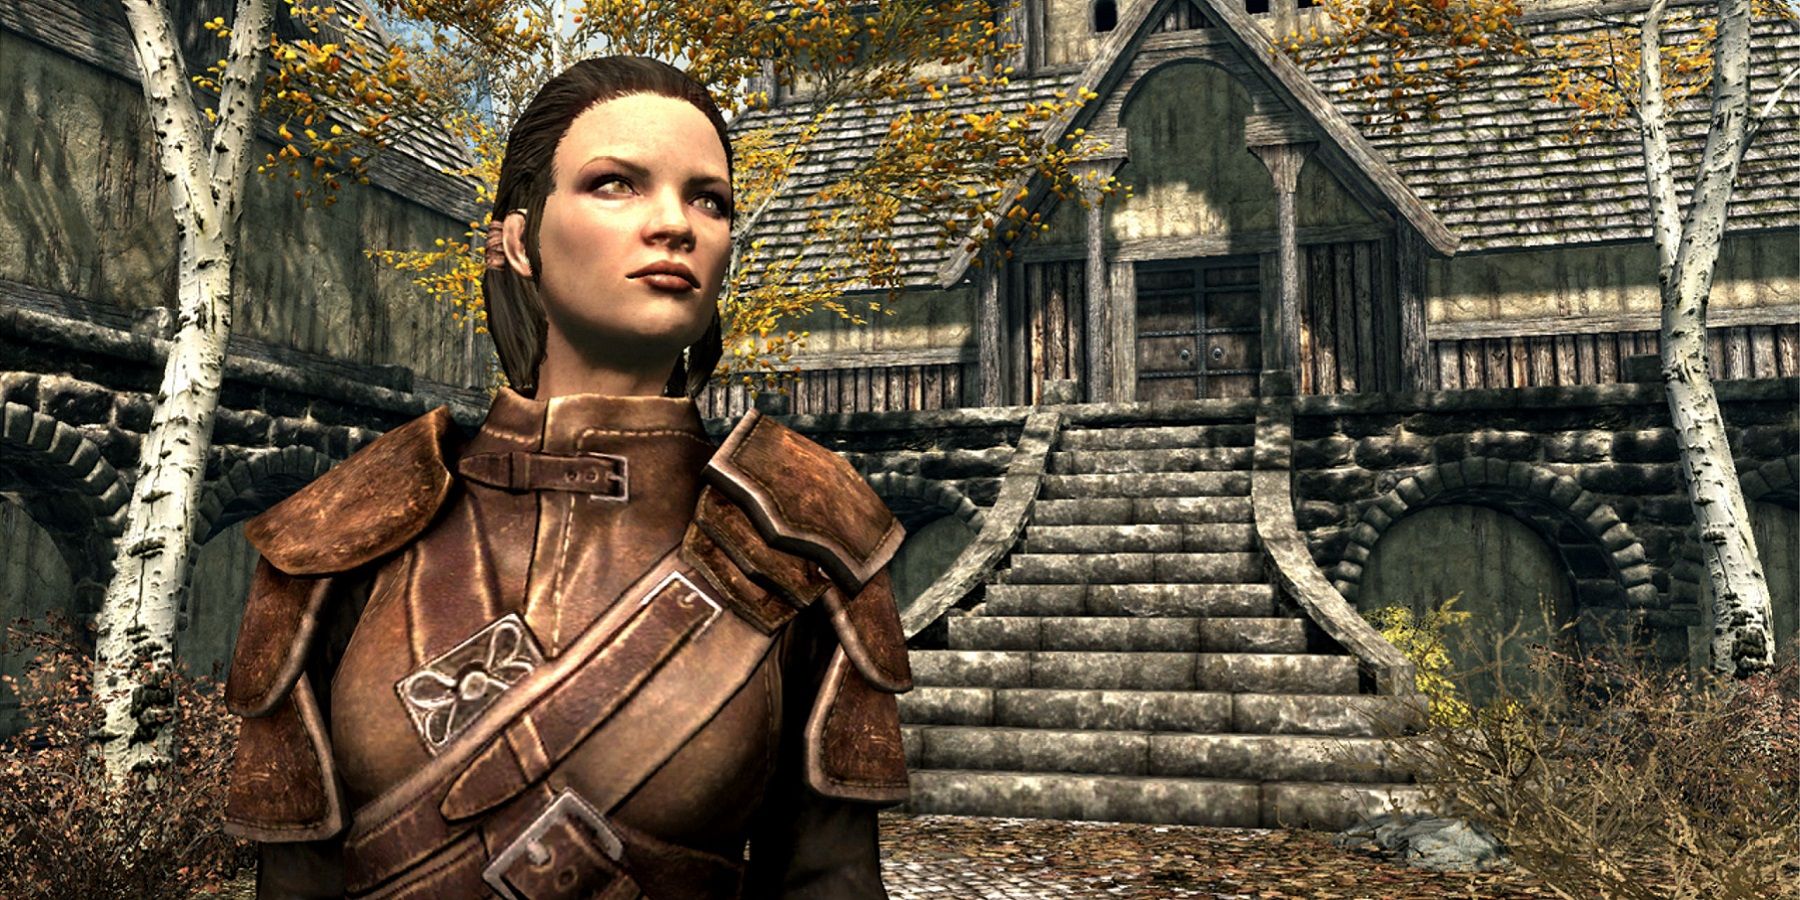 Screenshot from Skyrim showing a character in front of a building in Riften.